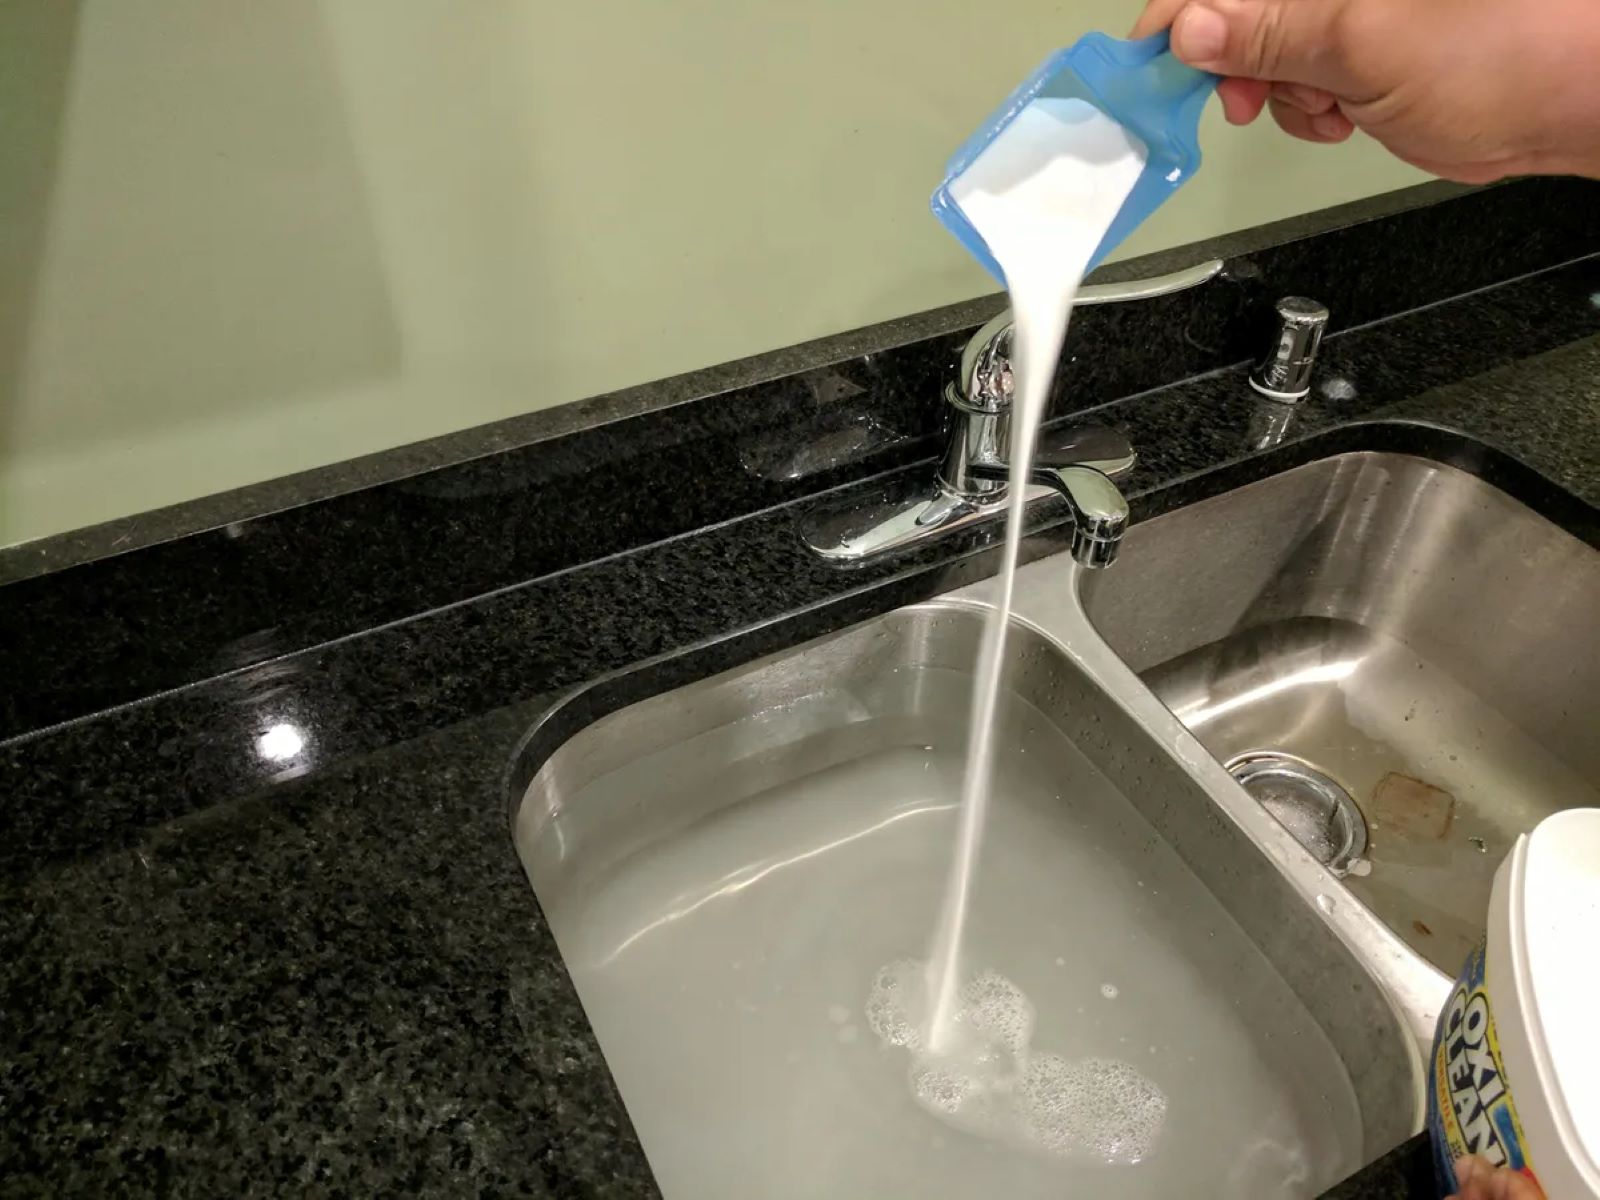 the-nozzle-is-stiff-how-to-discharge-deodorizer-into-the-sink